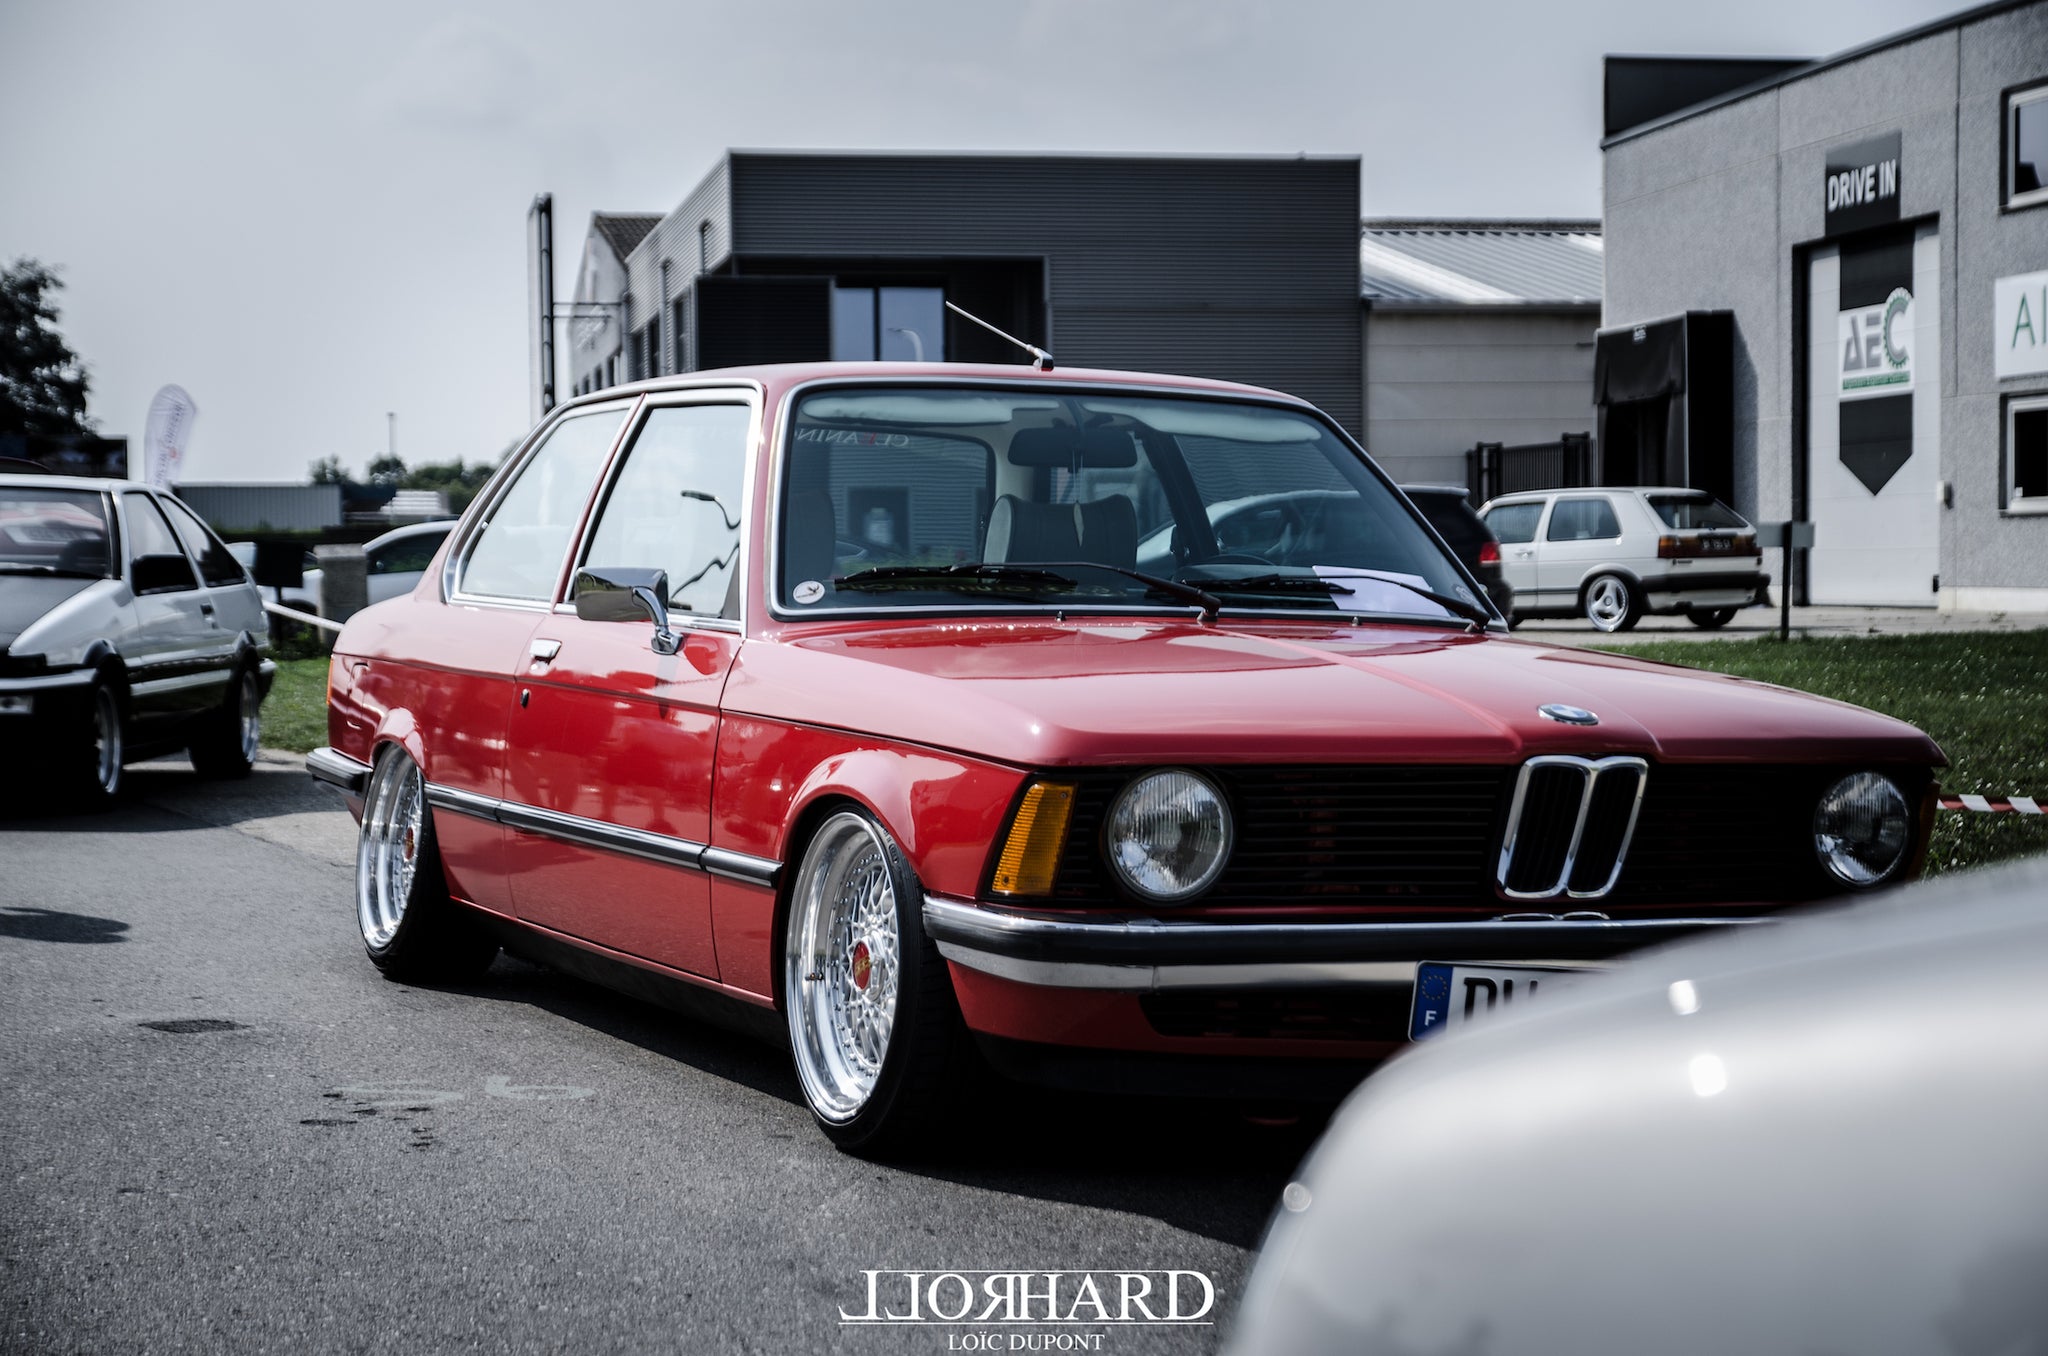 RollHard: The Belgian Chapter 2017. Loic DuPont, RollHard Show Coverage